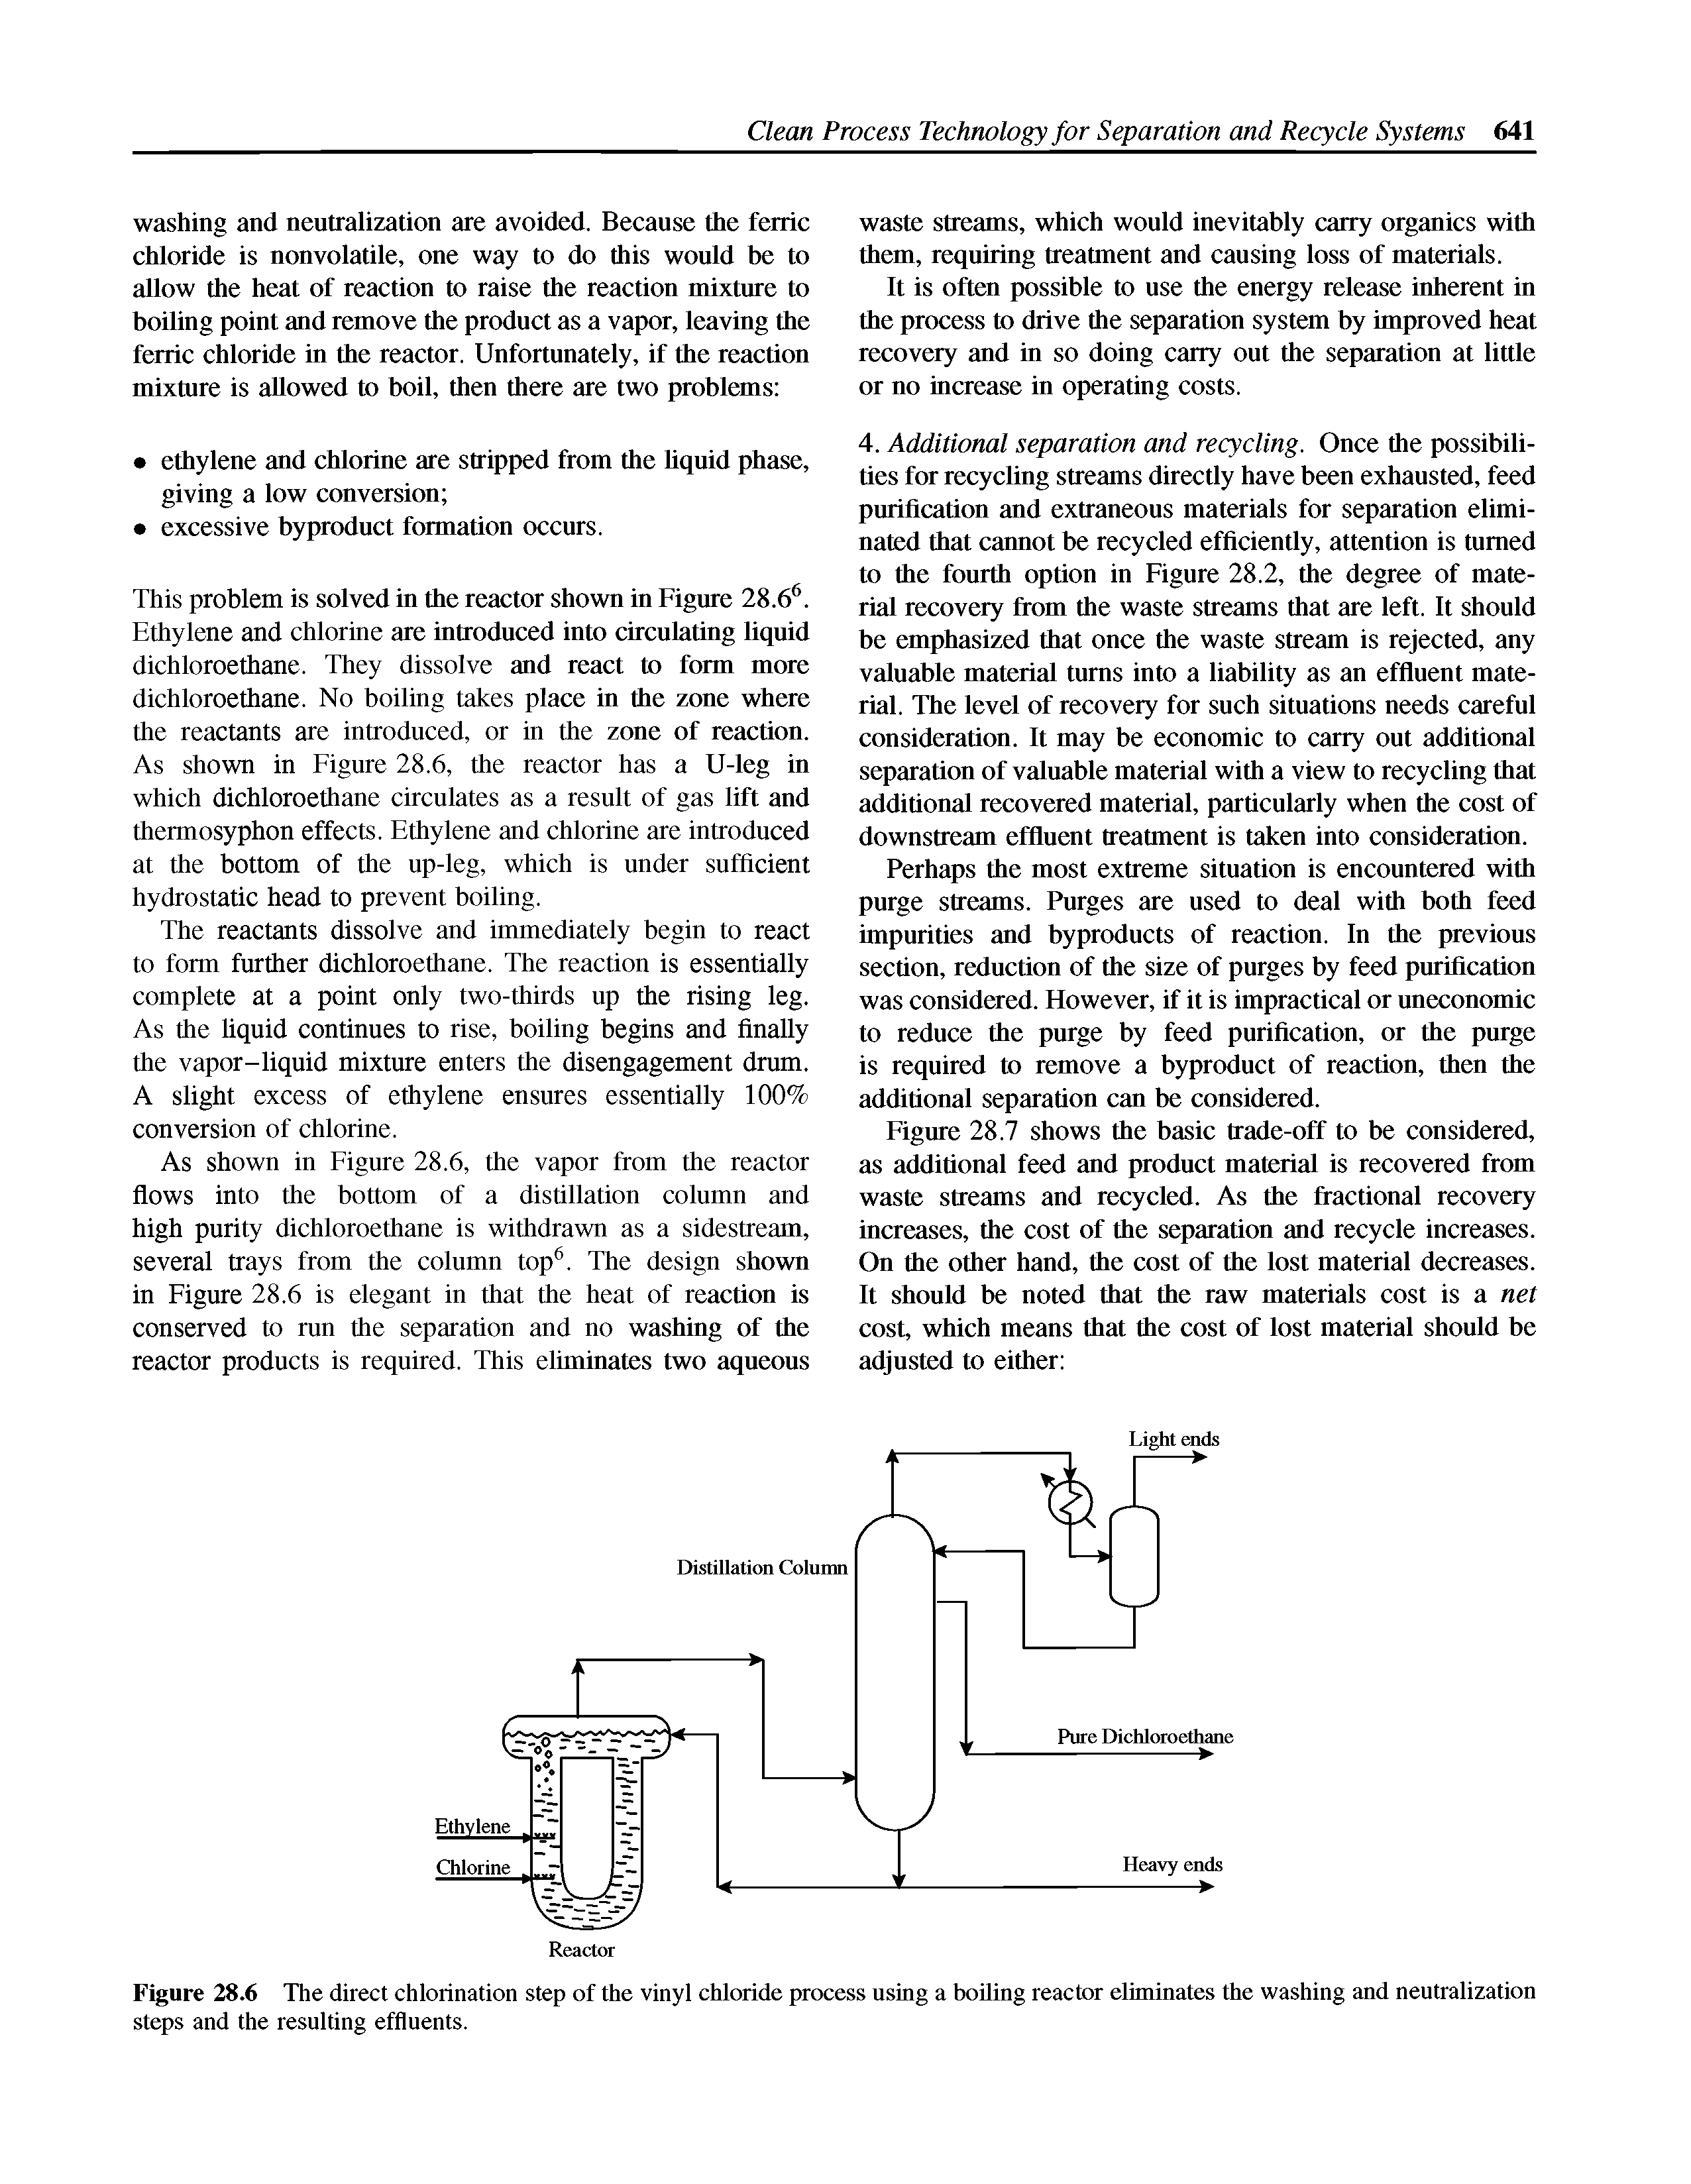 Figure 28.6 The direct chlorination step of the vinyl chloride process using a boiling reactor eliminates the washing and neutralization steps and the resulting effluents.